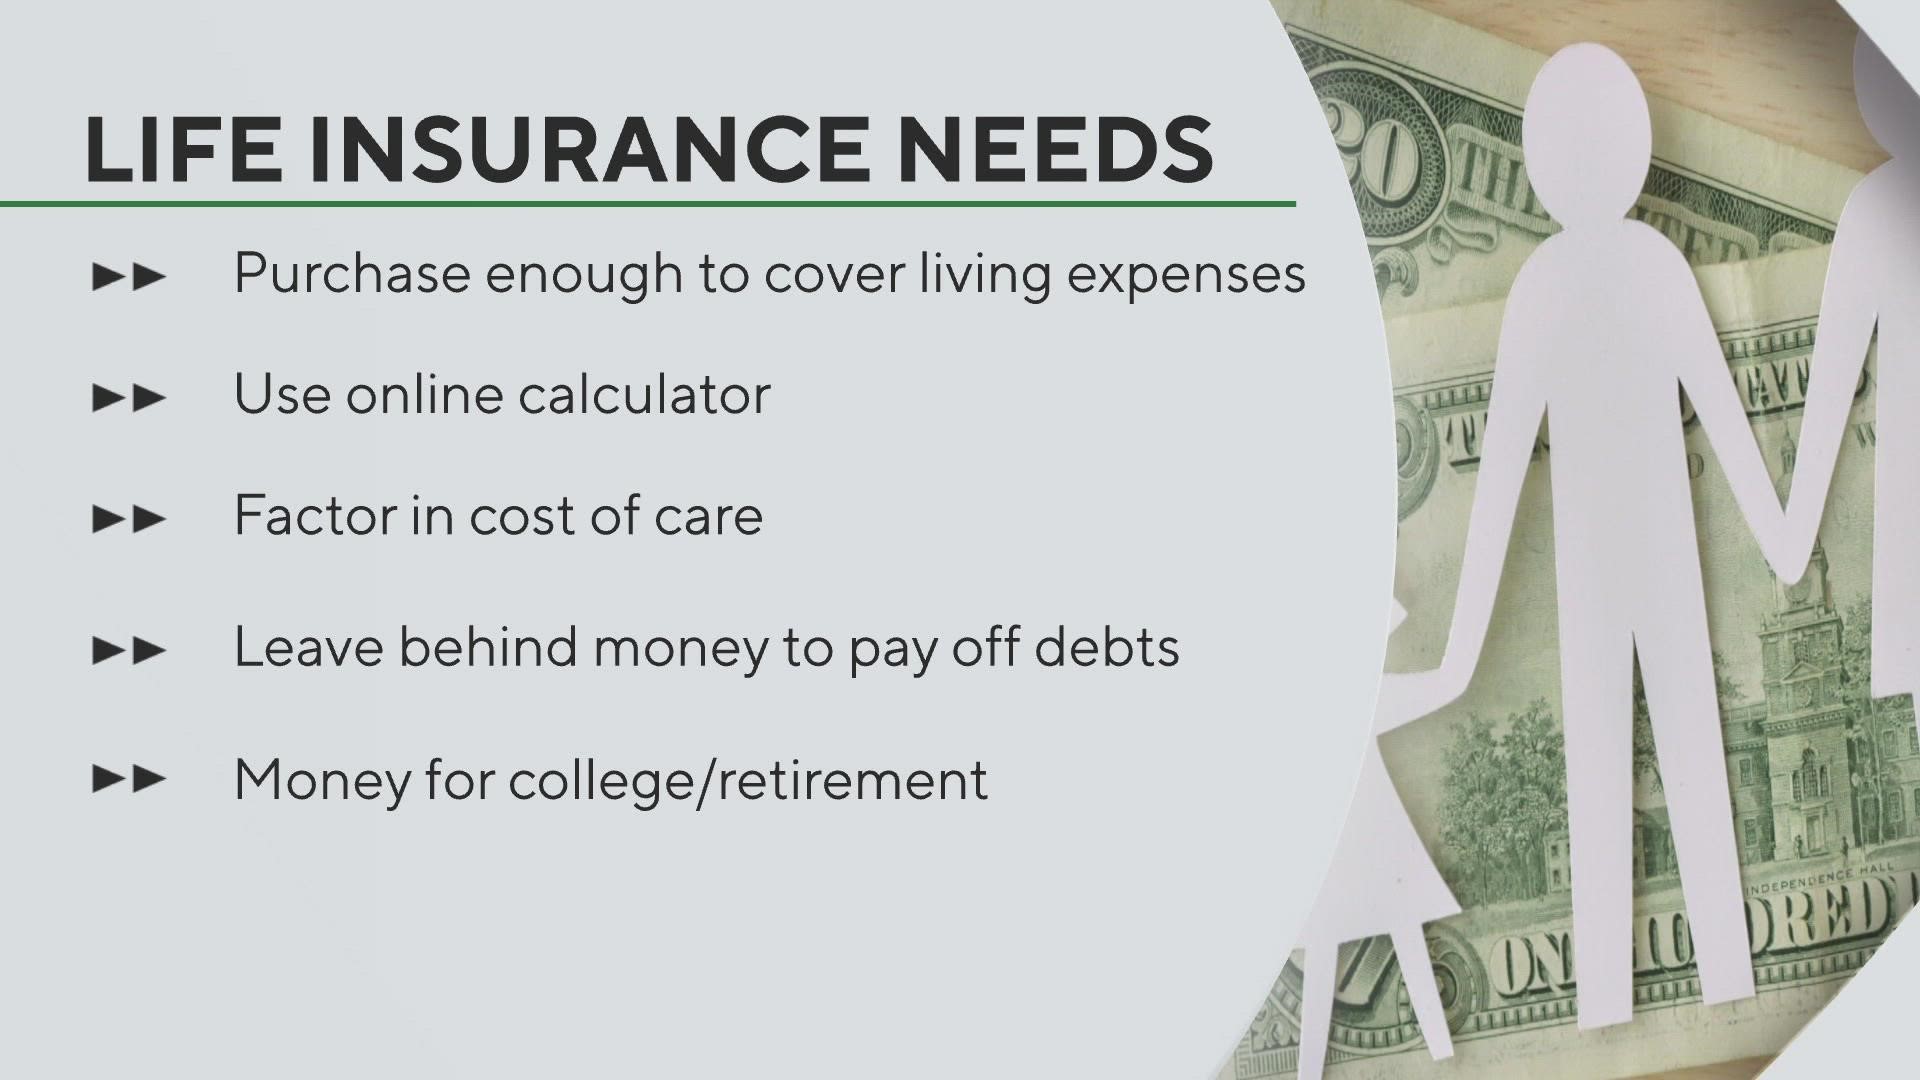 September is Life Insurance Awareness month so we're talking about coverage with CBS News Business analyst Jill Schlesinger.